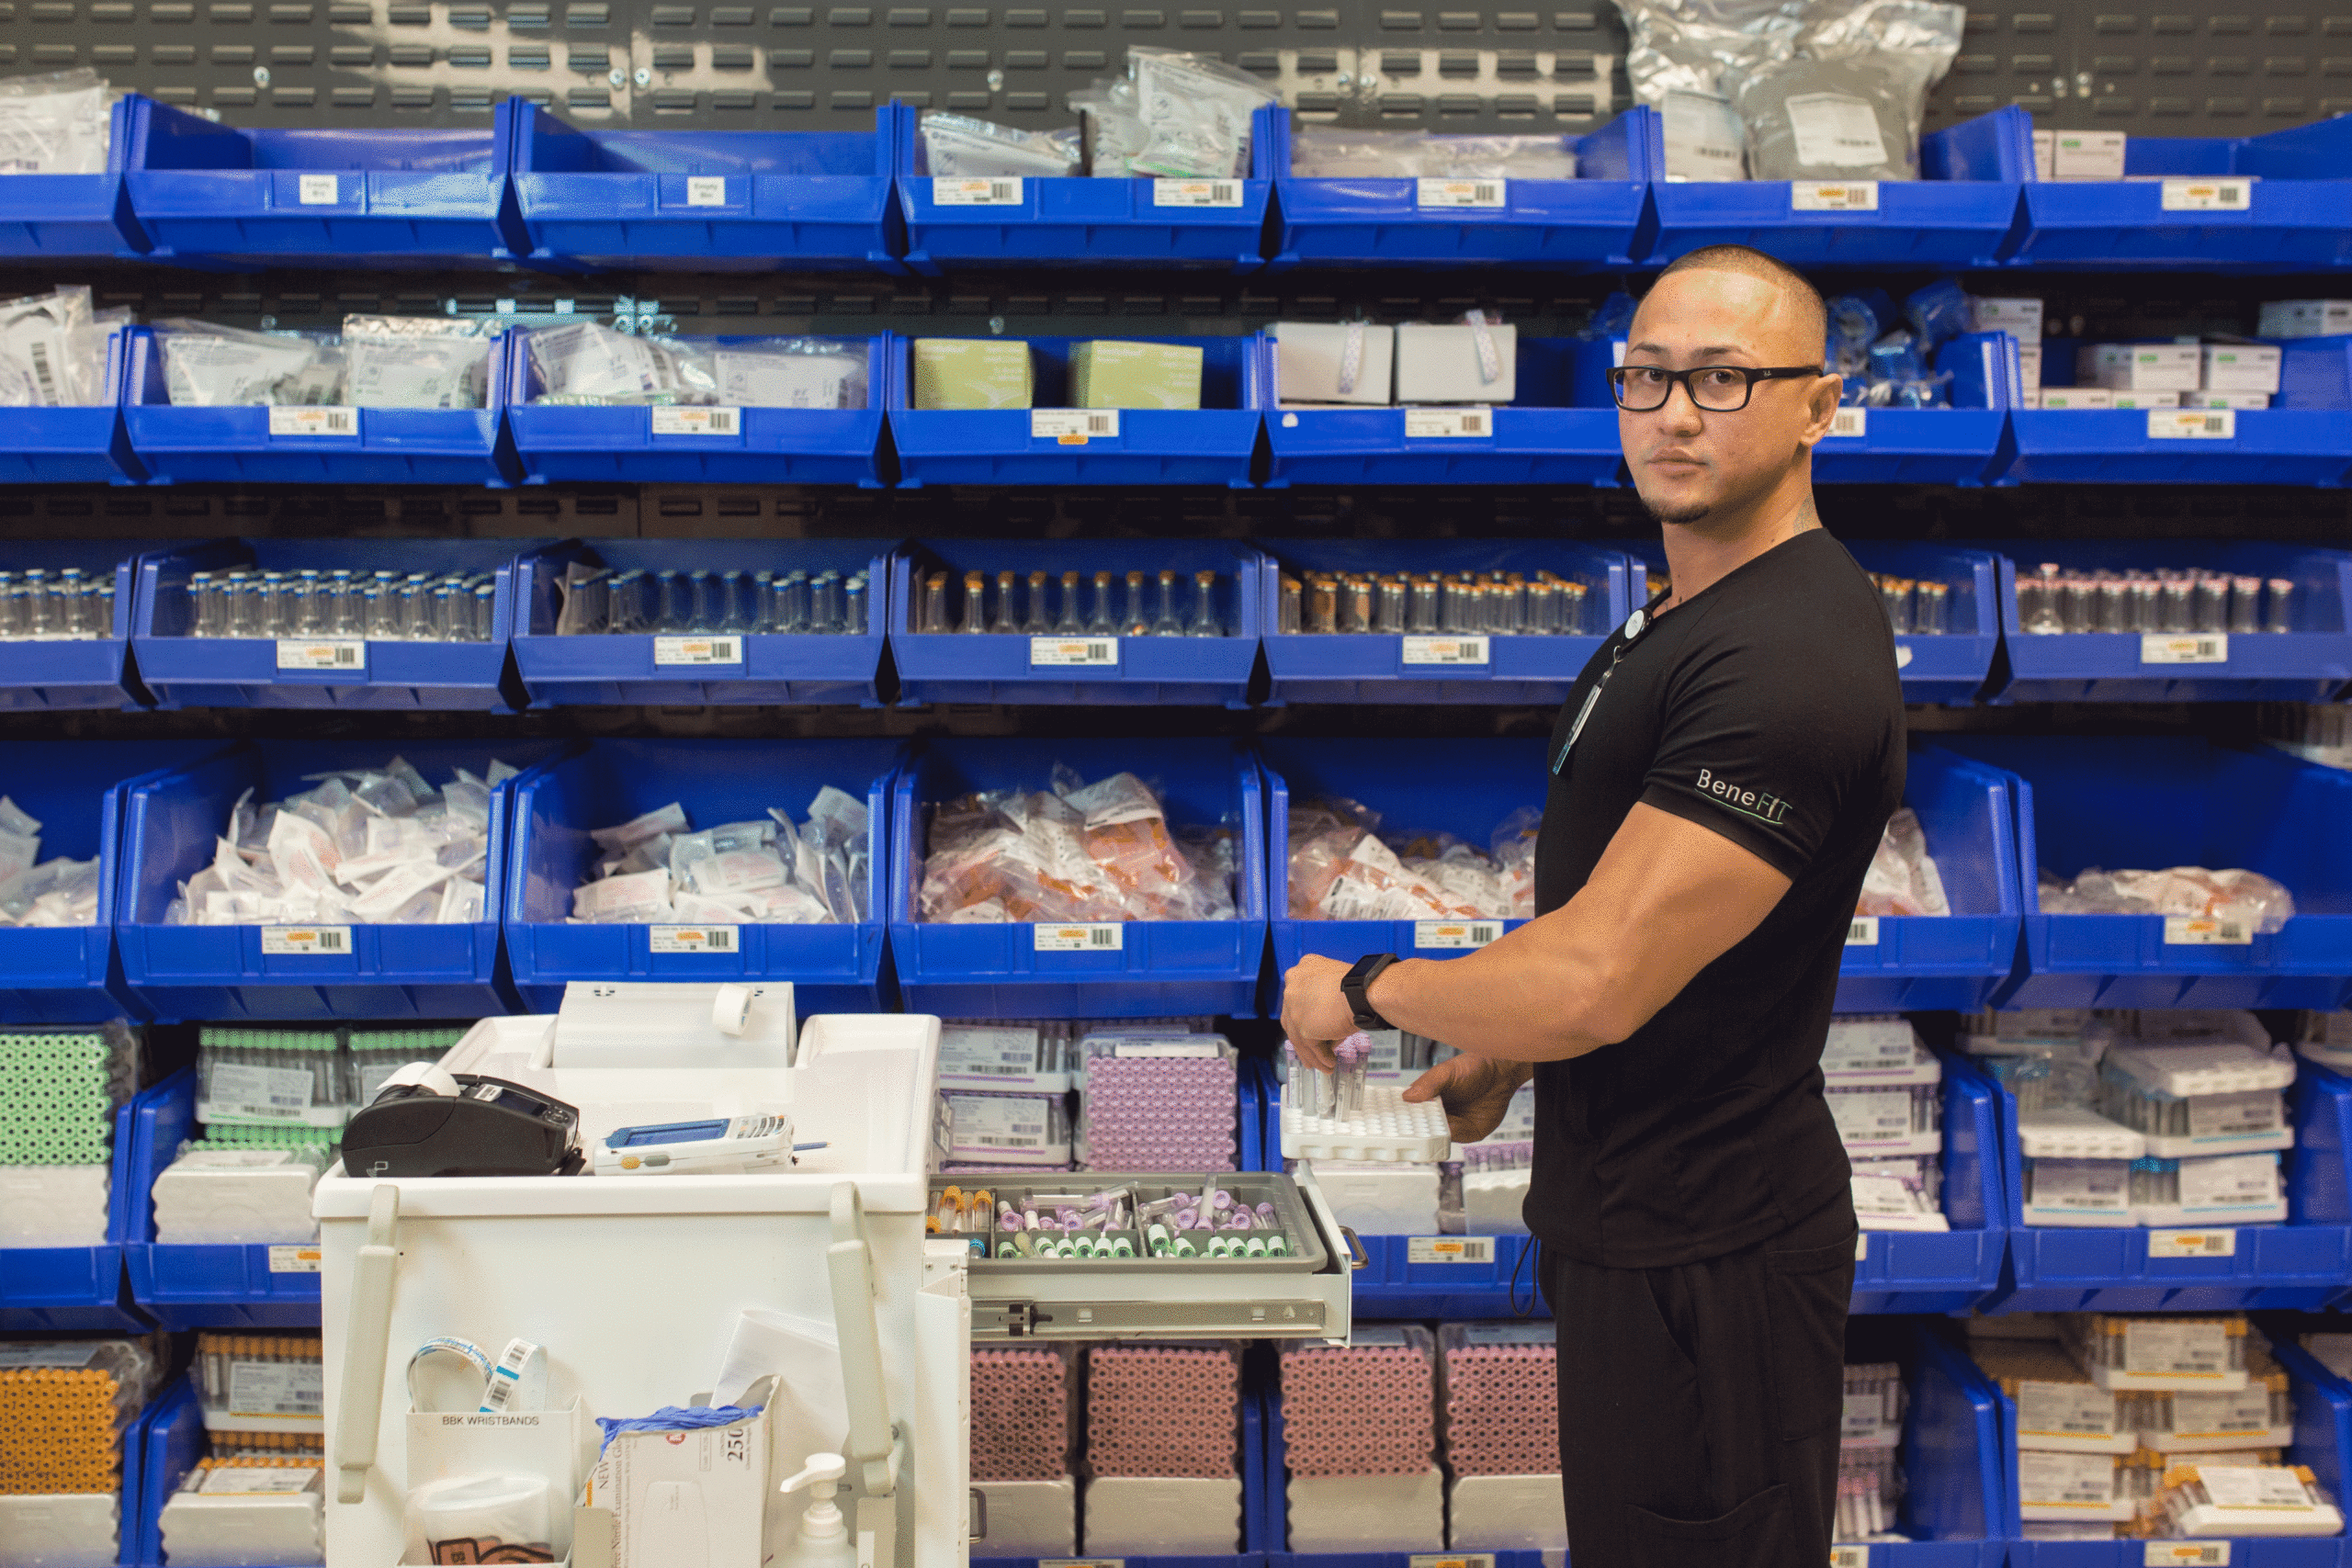 Man wearing black scrubs standing in front of shelves of medical supplies